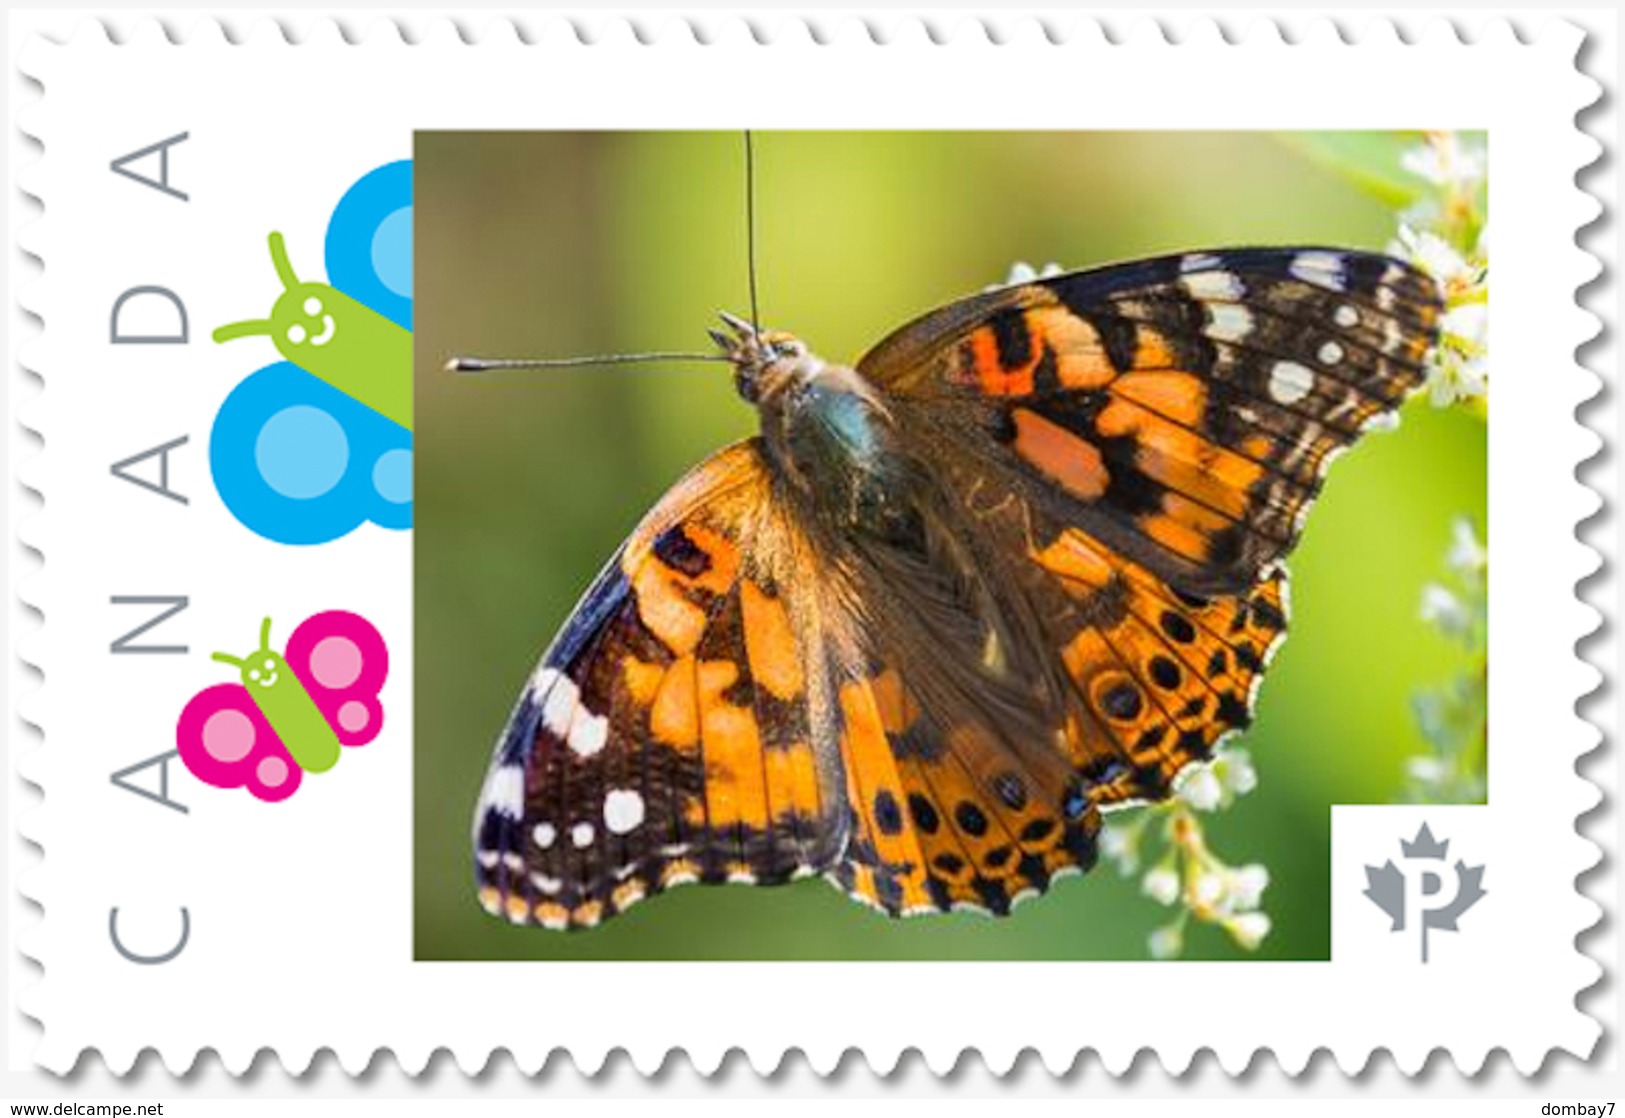 NEW!  BUTTERFLY Angel Top View Unique Picture Postage Stamp MNH Canada 2018 P18-01sn13 - Vlinders